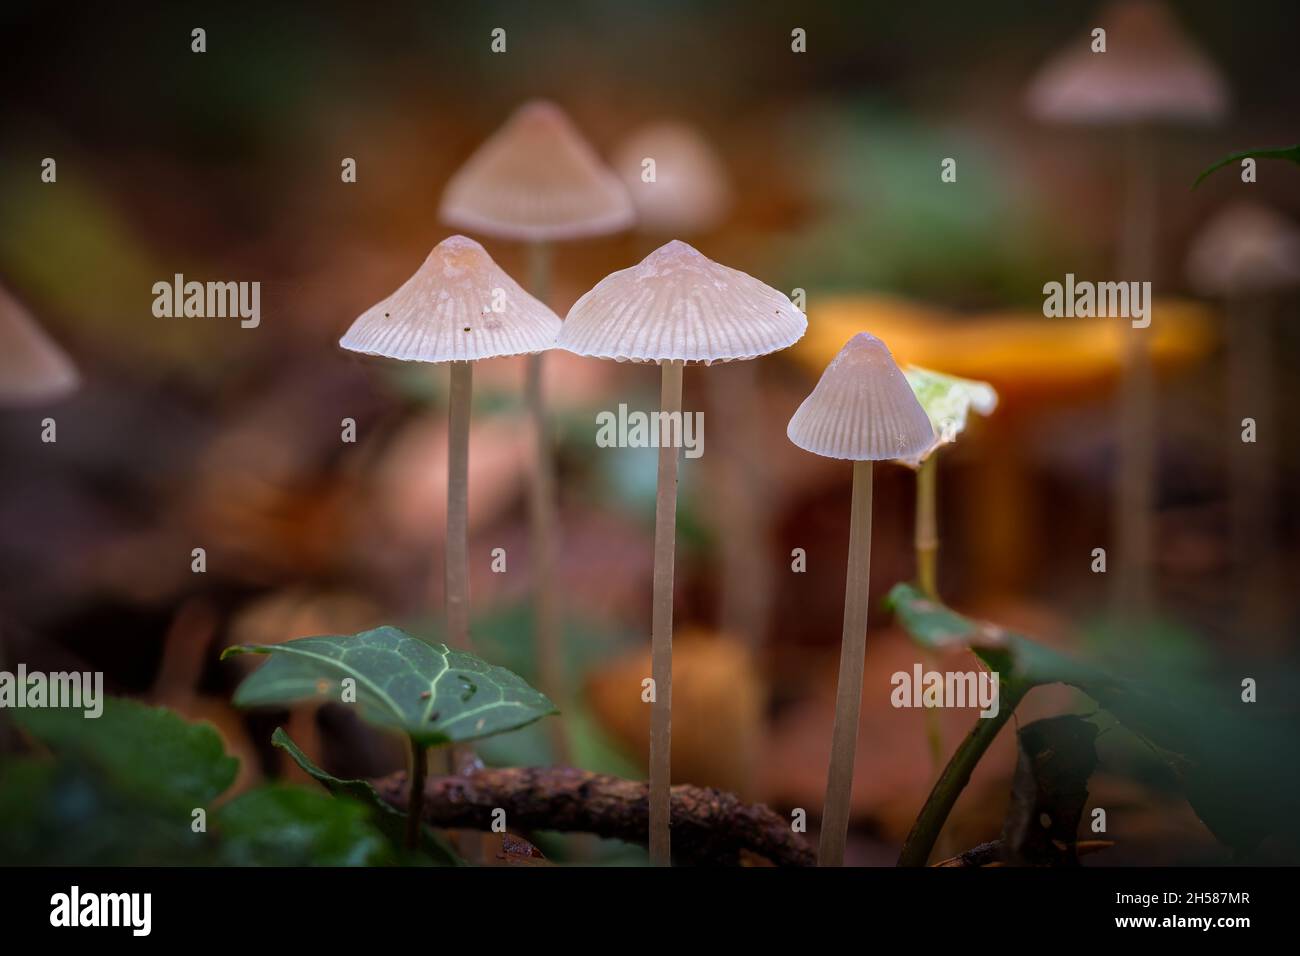 Group of some small white brightly lit mushrooms on high stems Stock Photo